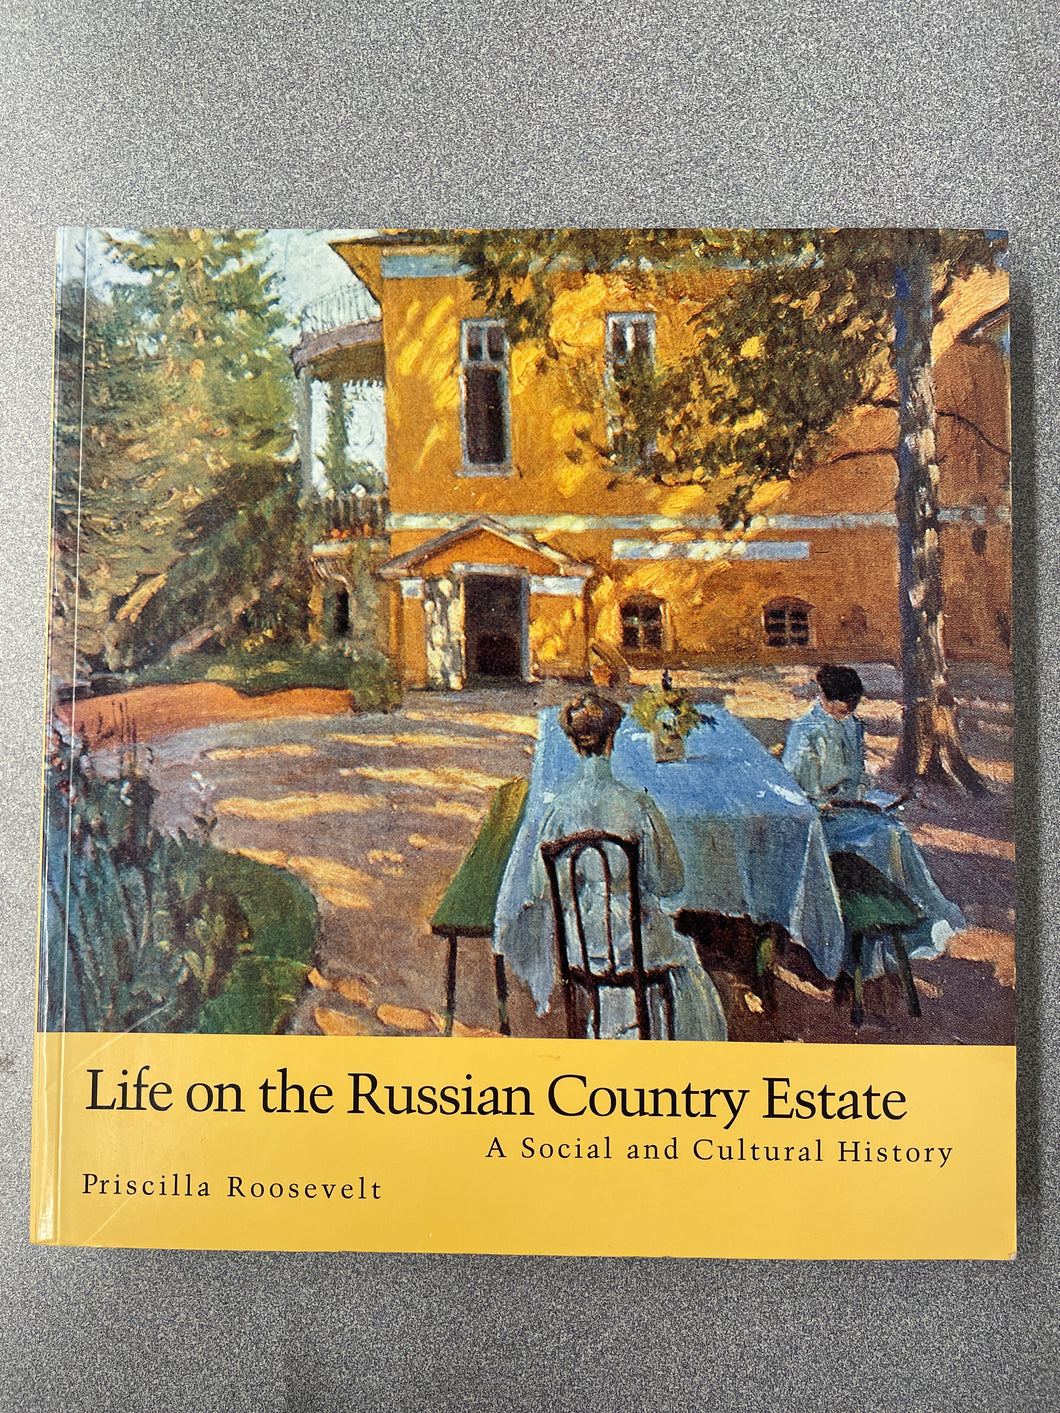 AN  Life on the Russian Country Estate: a Social and Cultural History,  Roosevelt, Priscilla [1995]  N 1/24